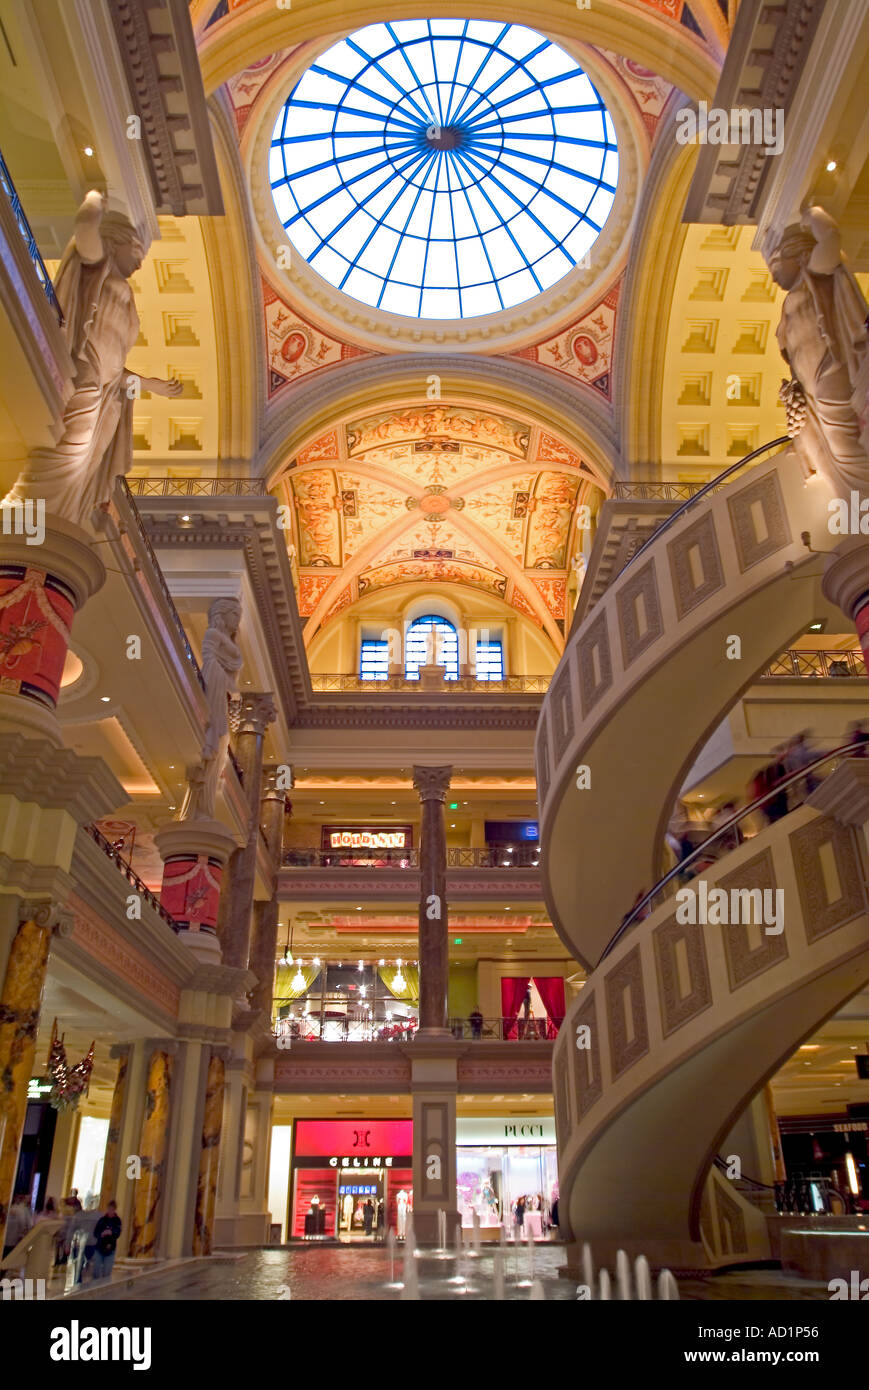 Forum Shops Mall in Las Vegas Editorial Stock Image - Image of